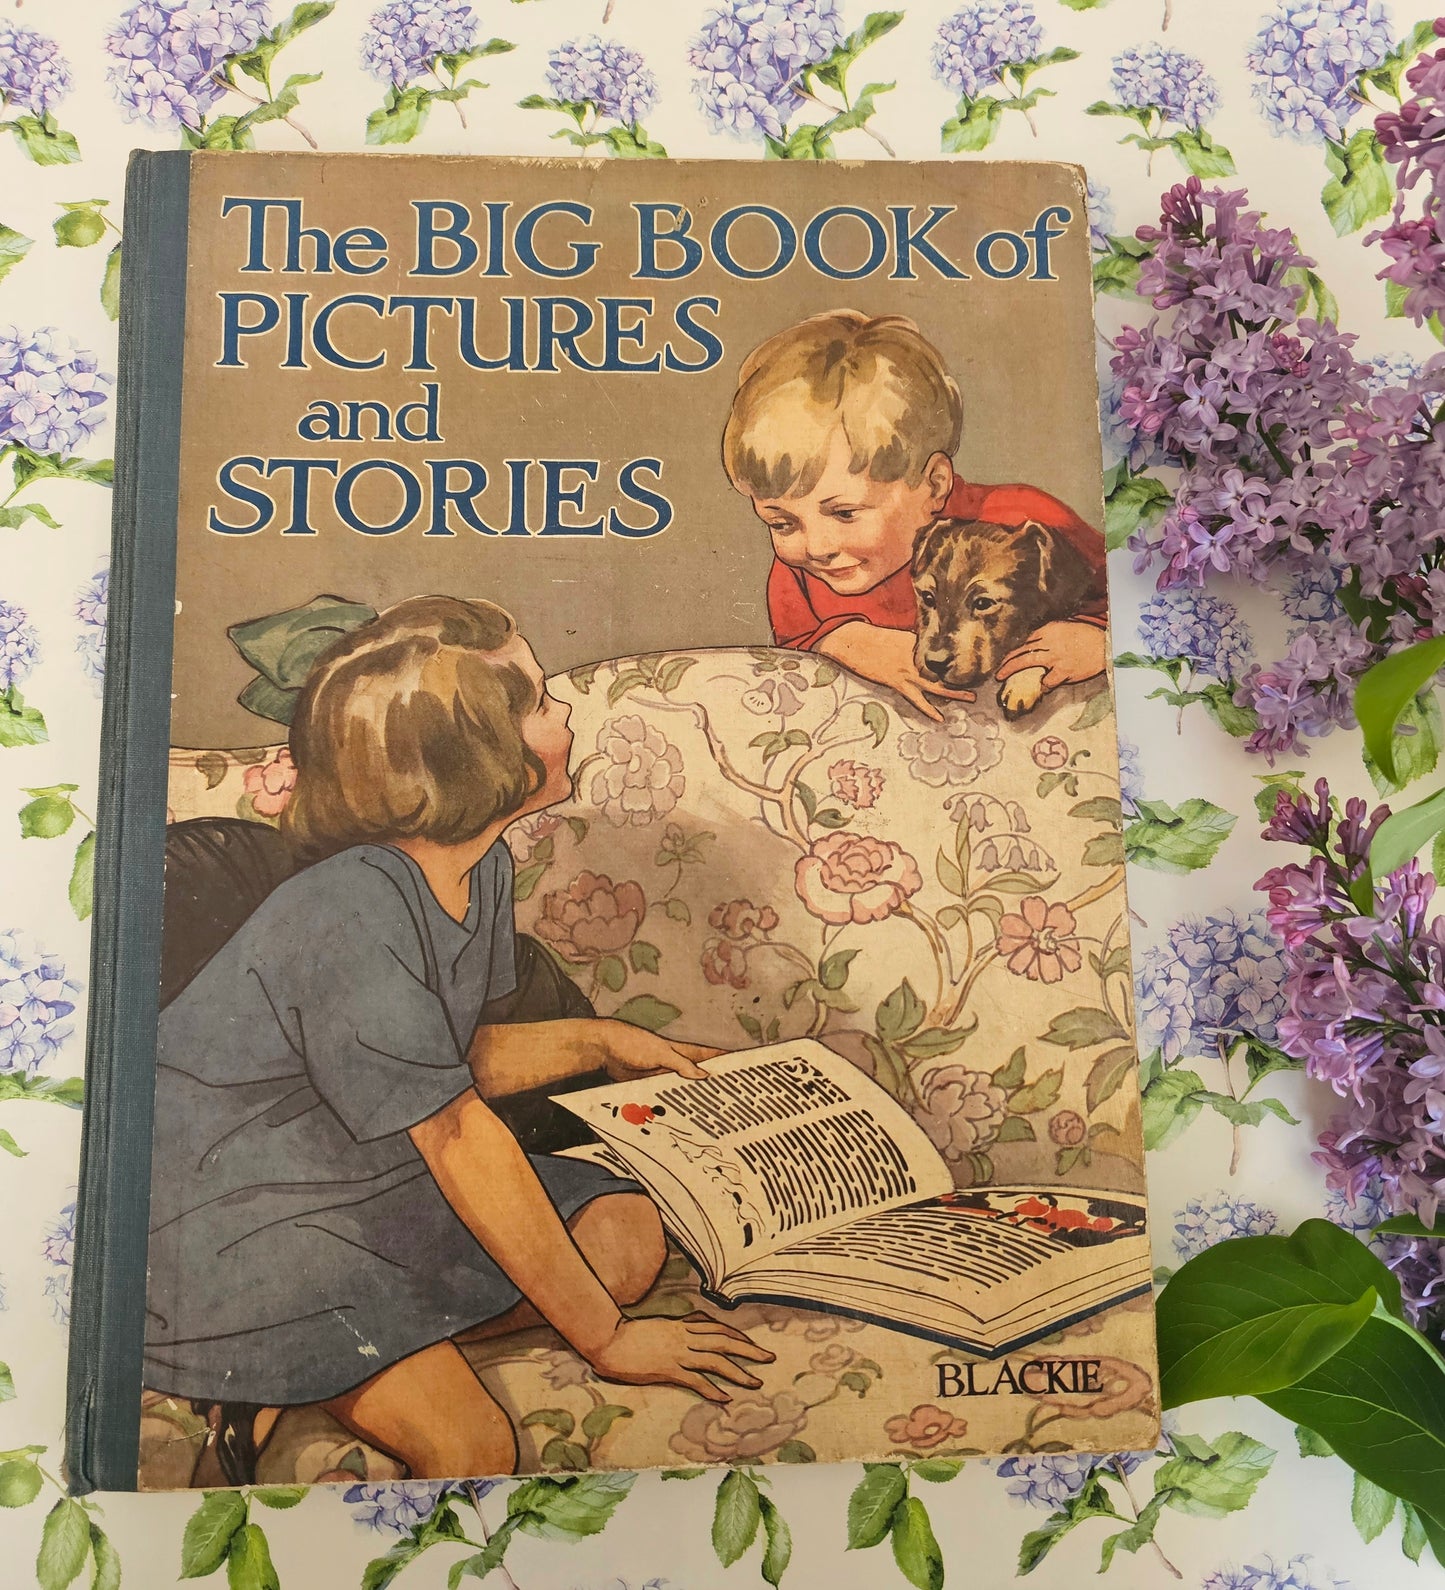 The Big Book of Pictures and Stories / Blackie, London / Large Book / 32 Colour Plates - Anne Anderson, Florence Harrison, Louis Wain etc.